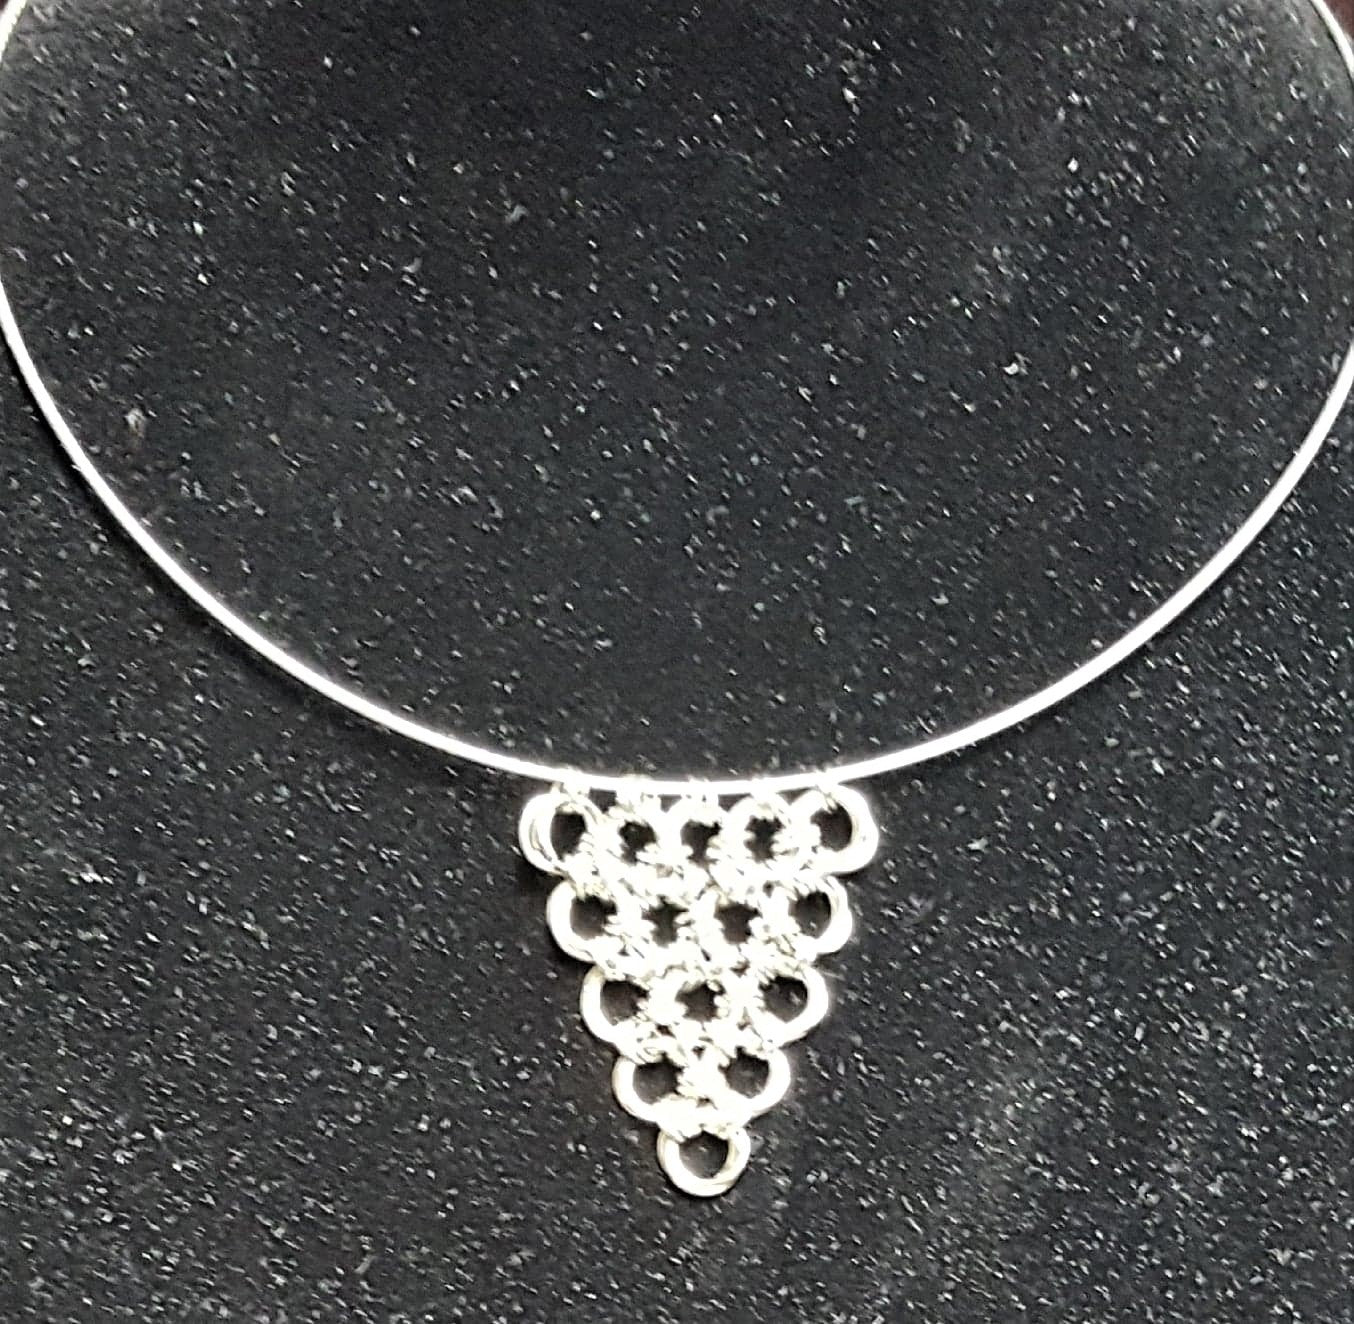 Neckwire, Chainmaille - NEW LOWER PRICE!